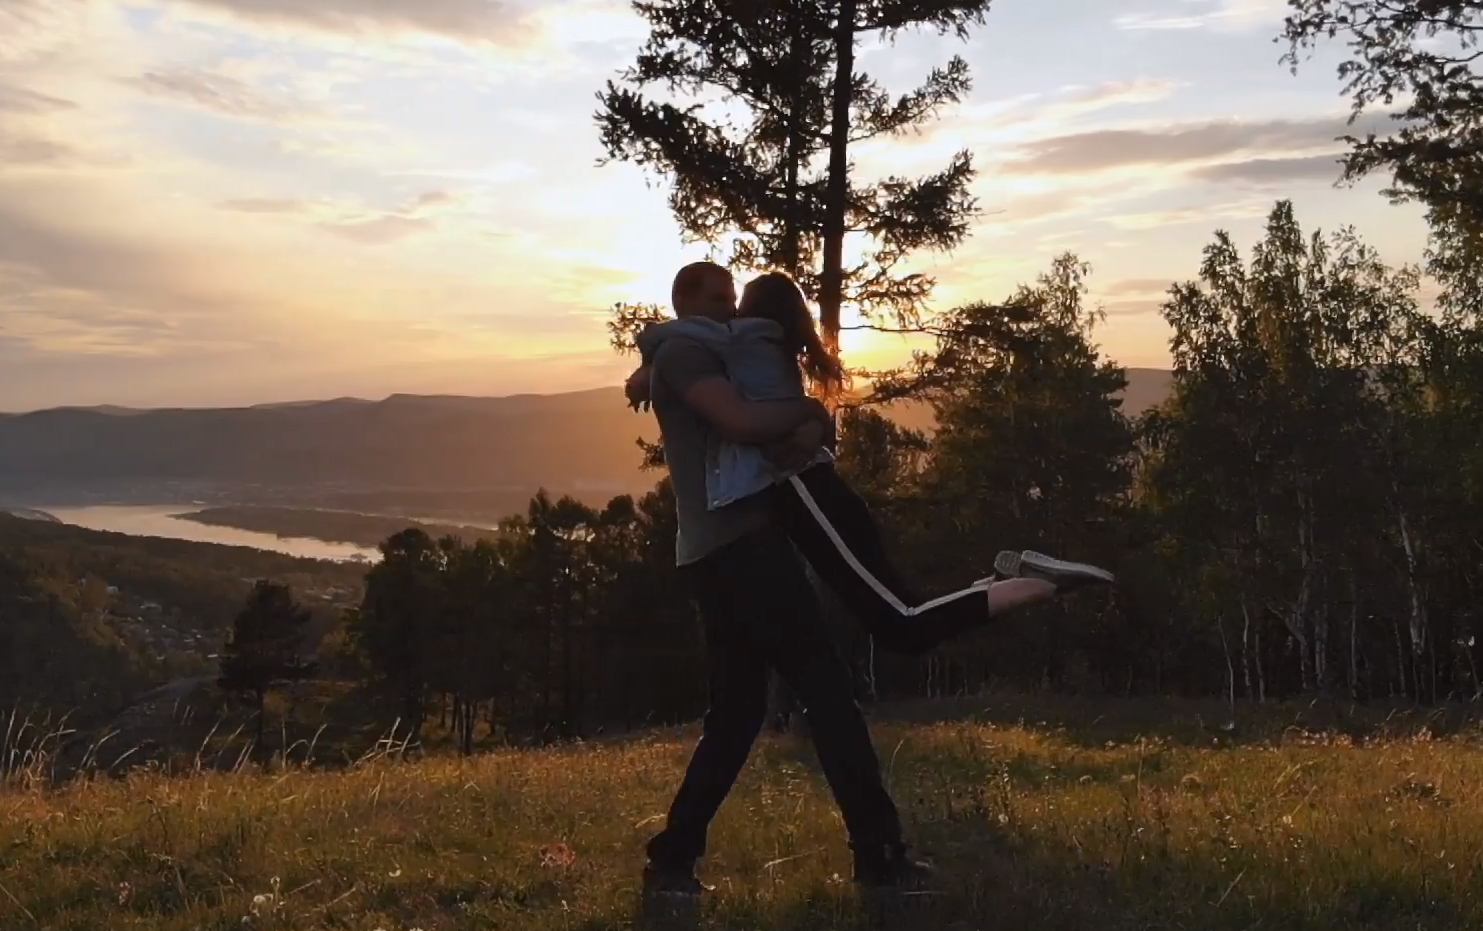 A man twirling his girlfriend in nature, enjoying a splendid time together with a beautiful sunset in the background.